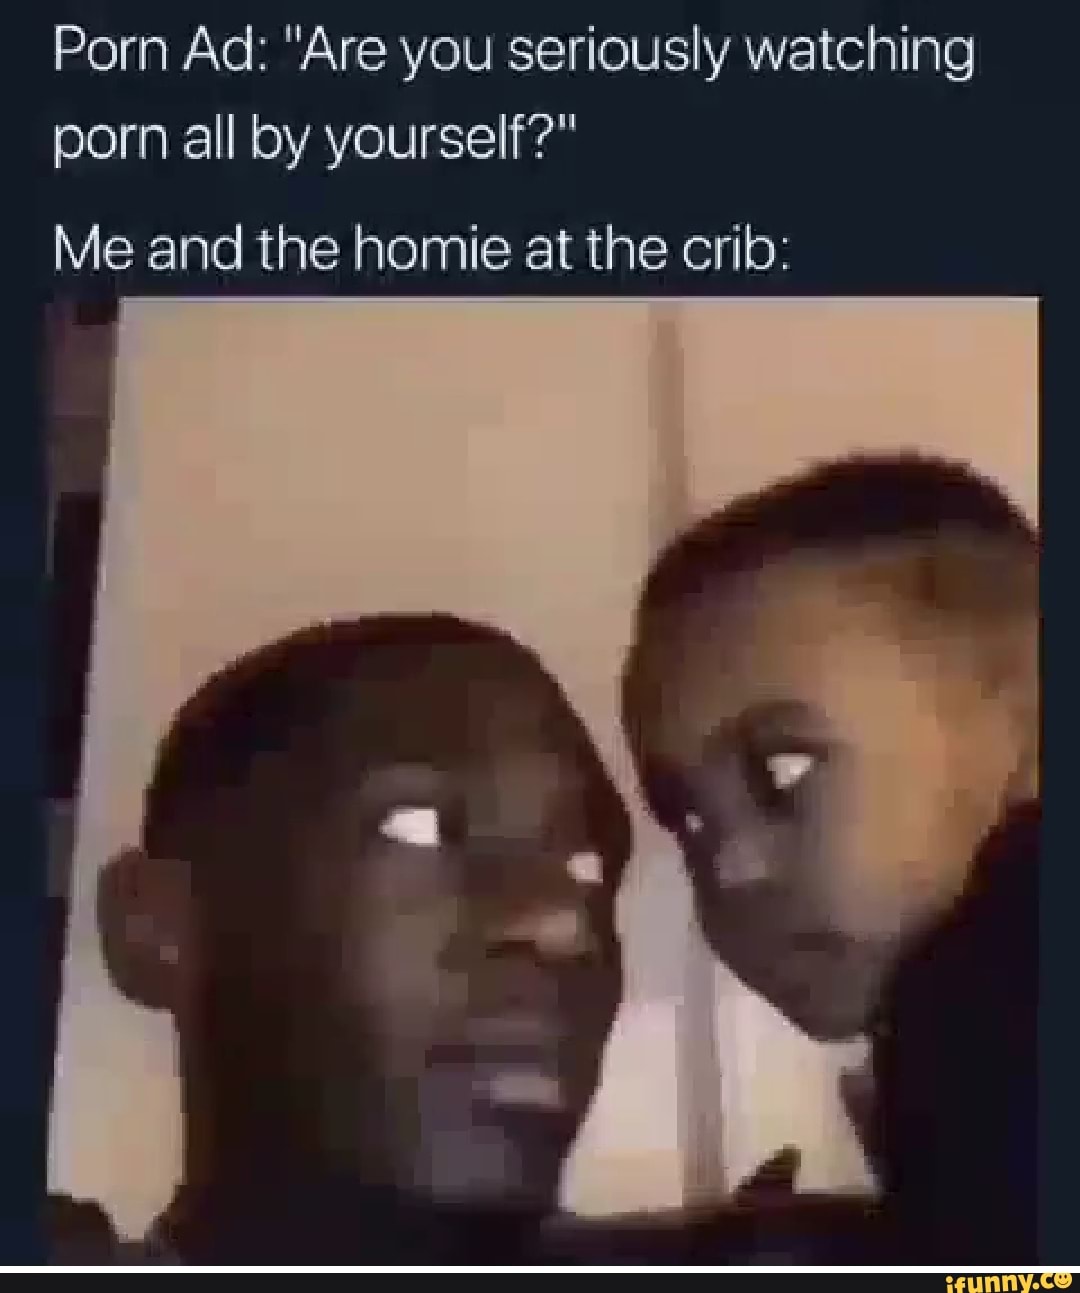 Are you watching porn by yourself